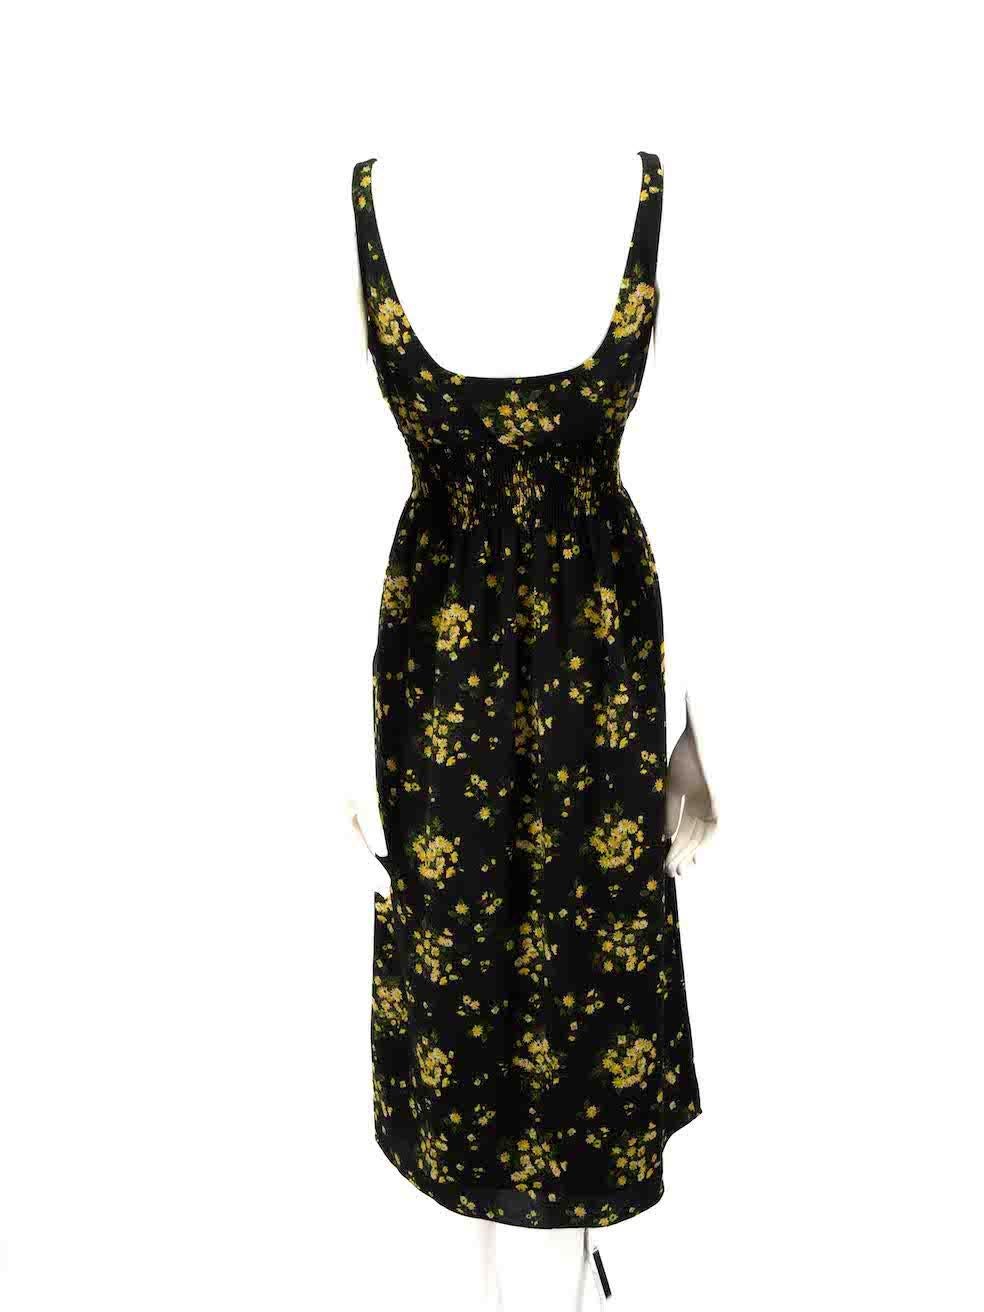 Emilia Wickstead Black Floral Sleeveless Midi Dress Size M In Good Condition For Sale In London, GB